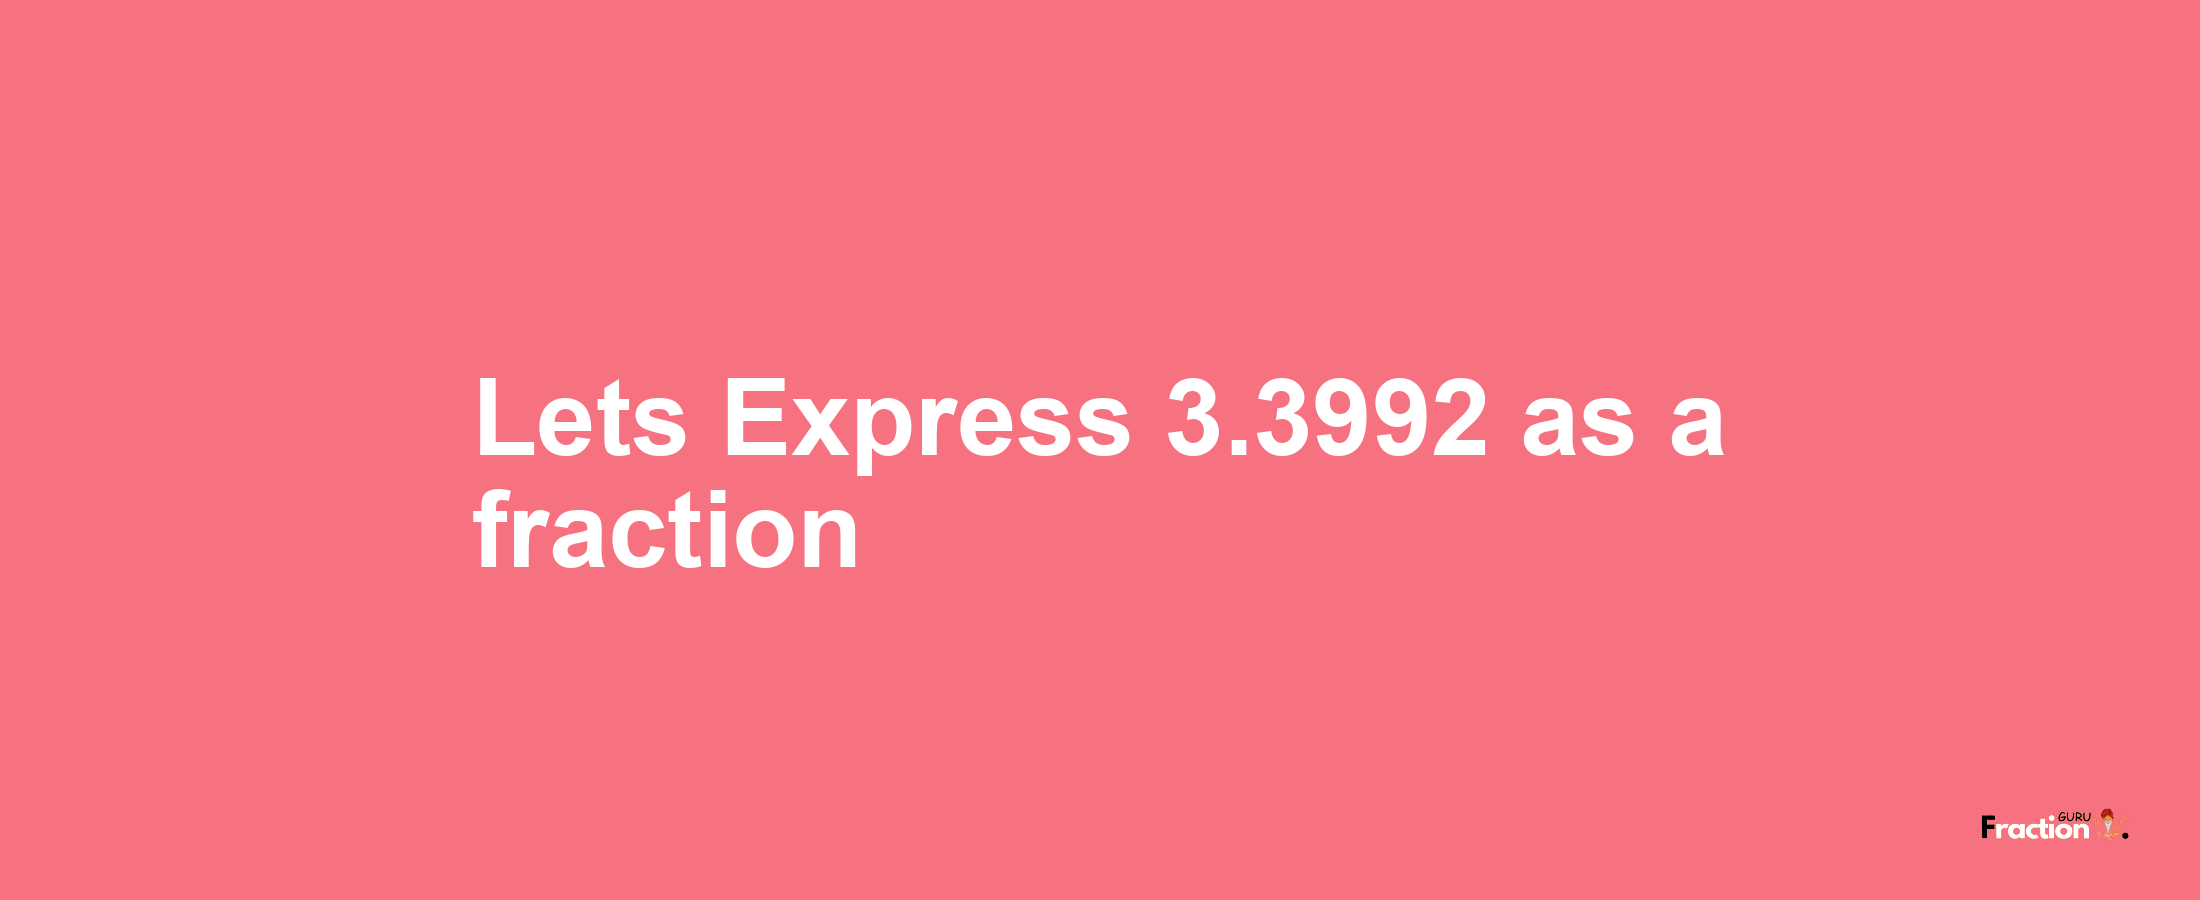 Lets Express 3.3992 as afraction